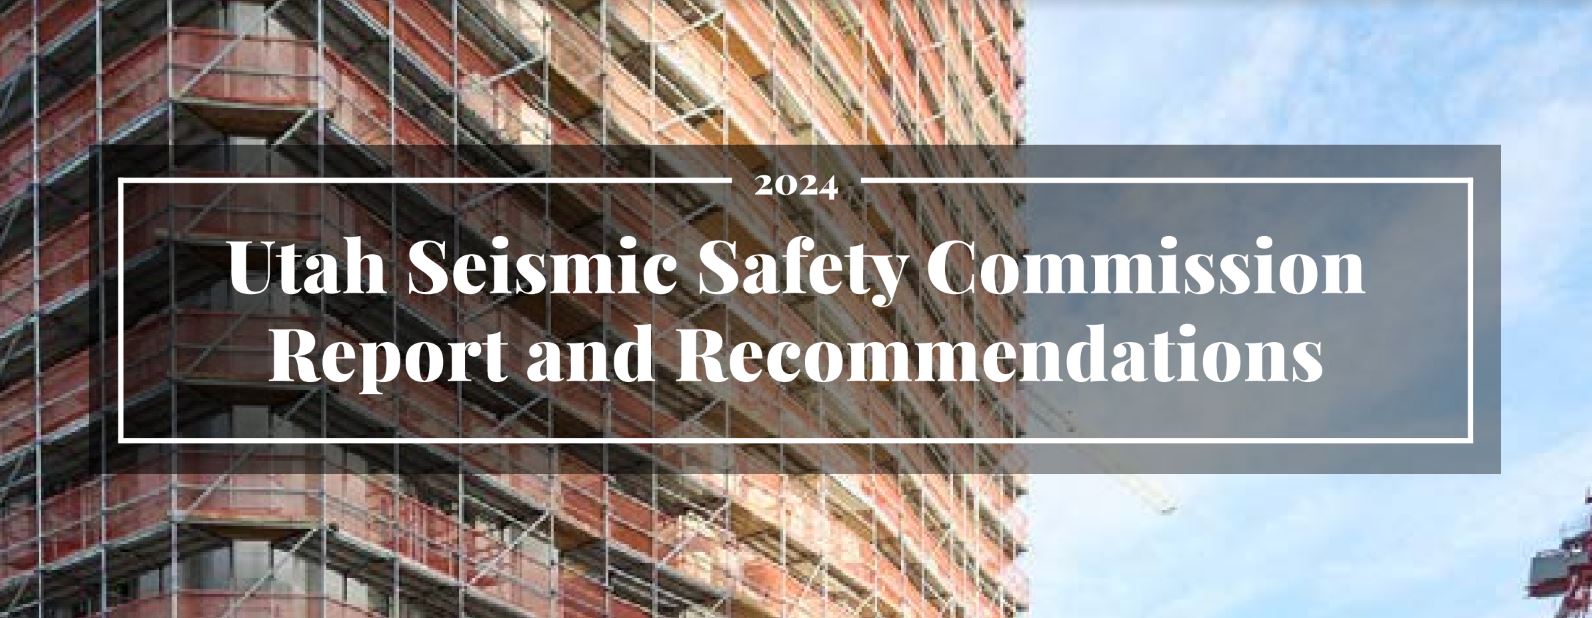 Featured image for “New Release: 2024 Utah Seismic Safety Commission Report and Recommendations”